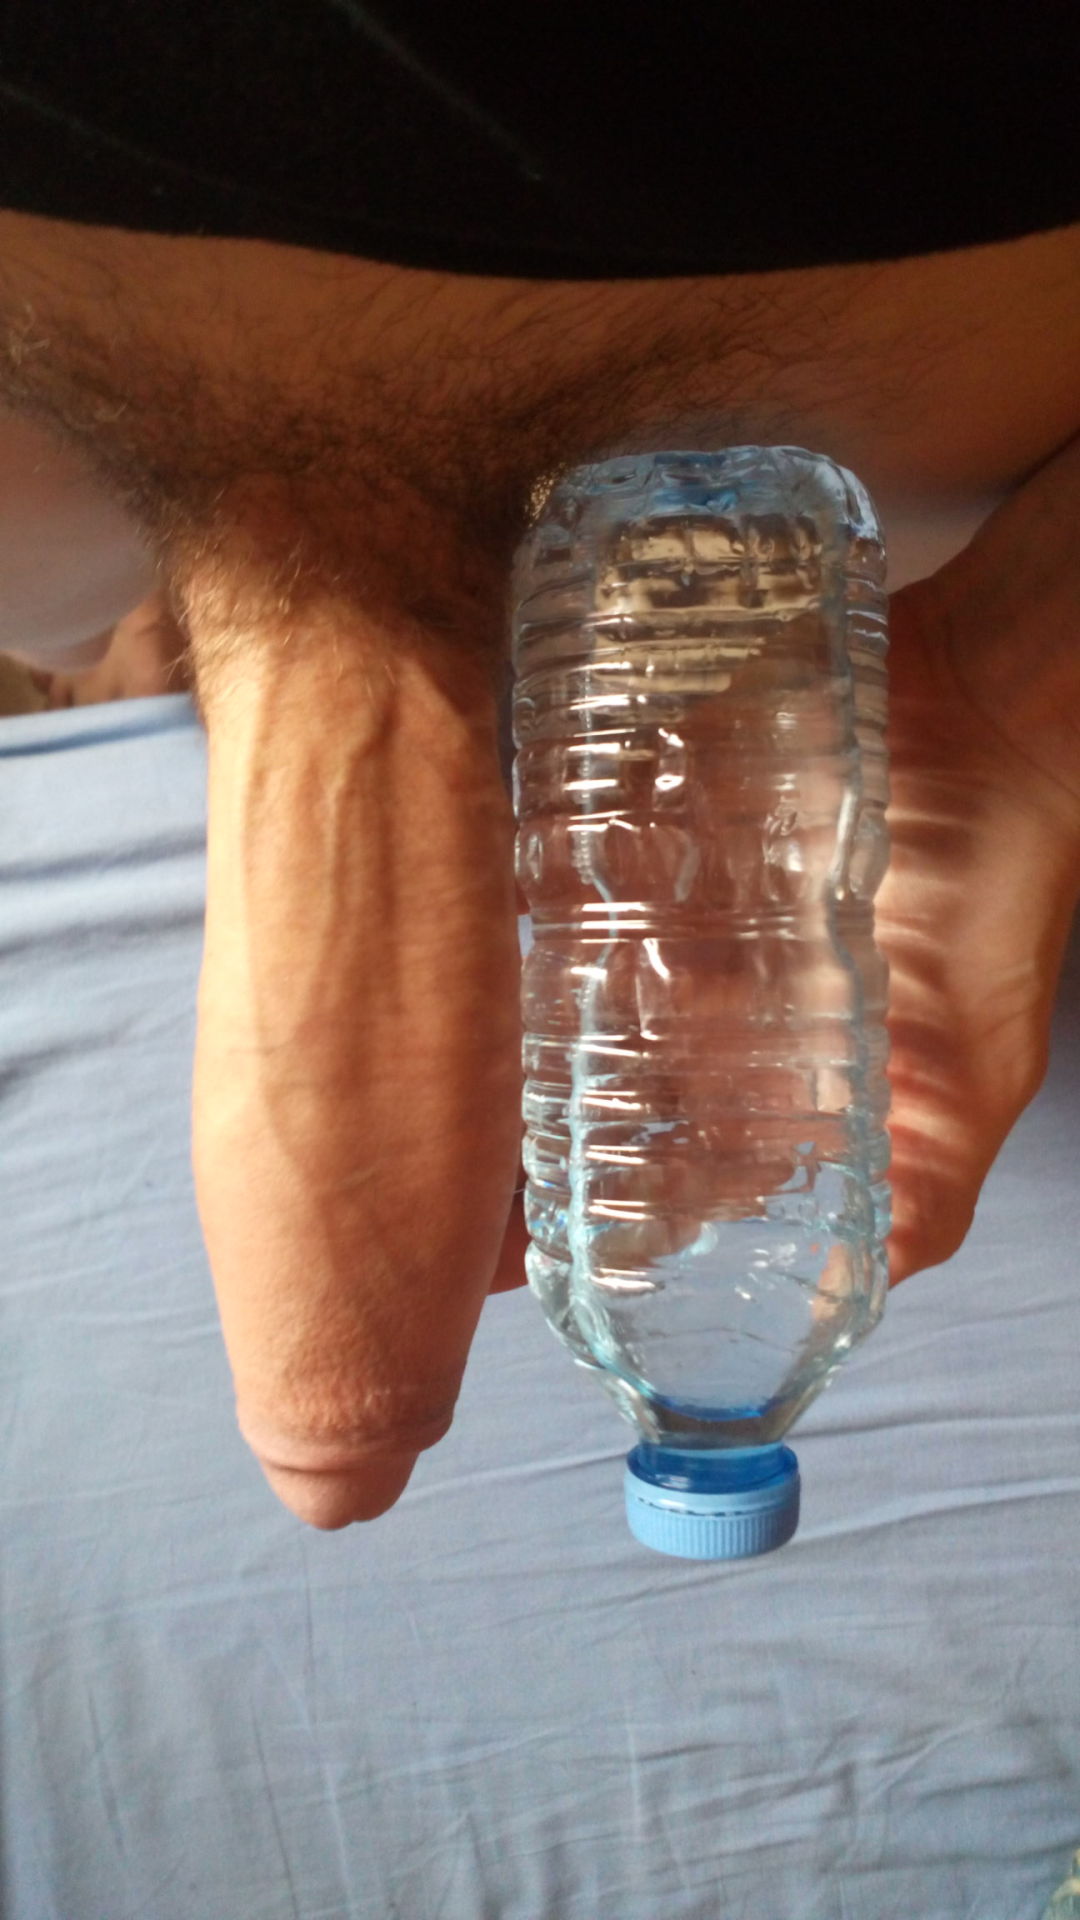 sexmajix: This is a good dick for fucking. Tapered tip let’s him go in easy or